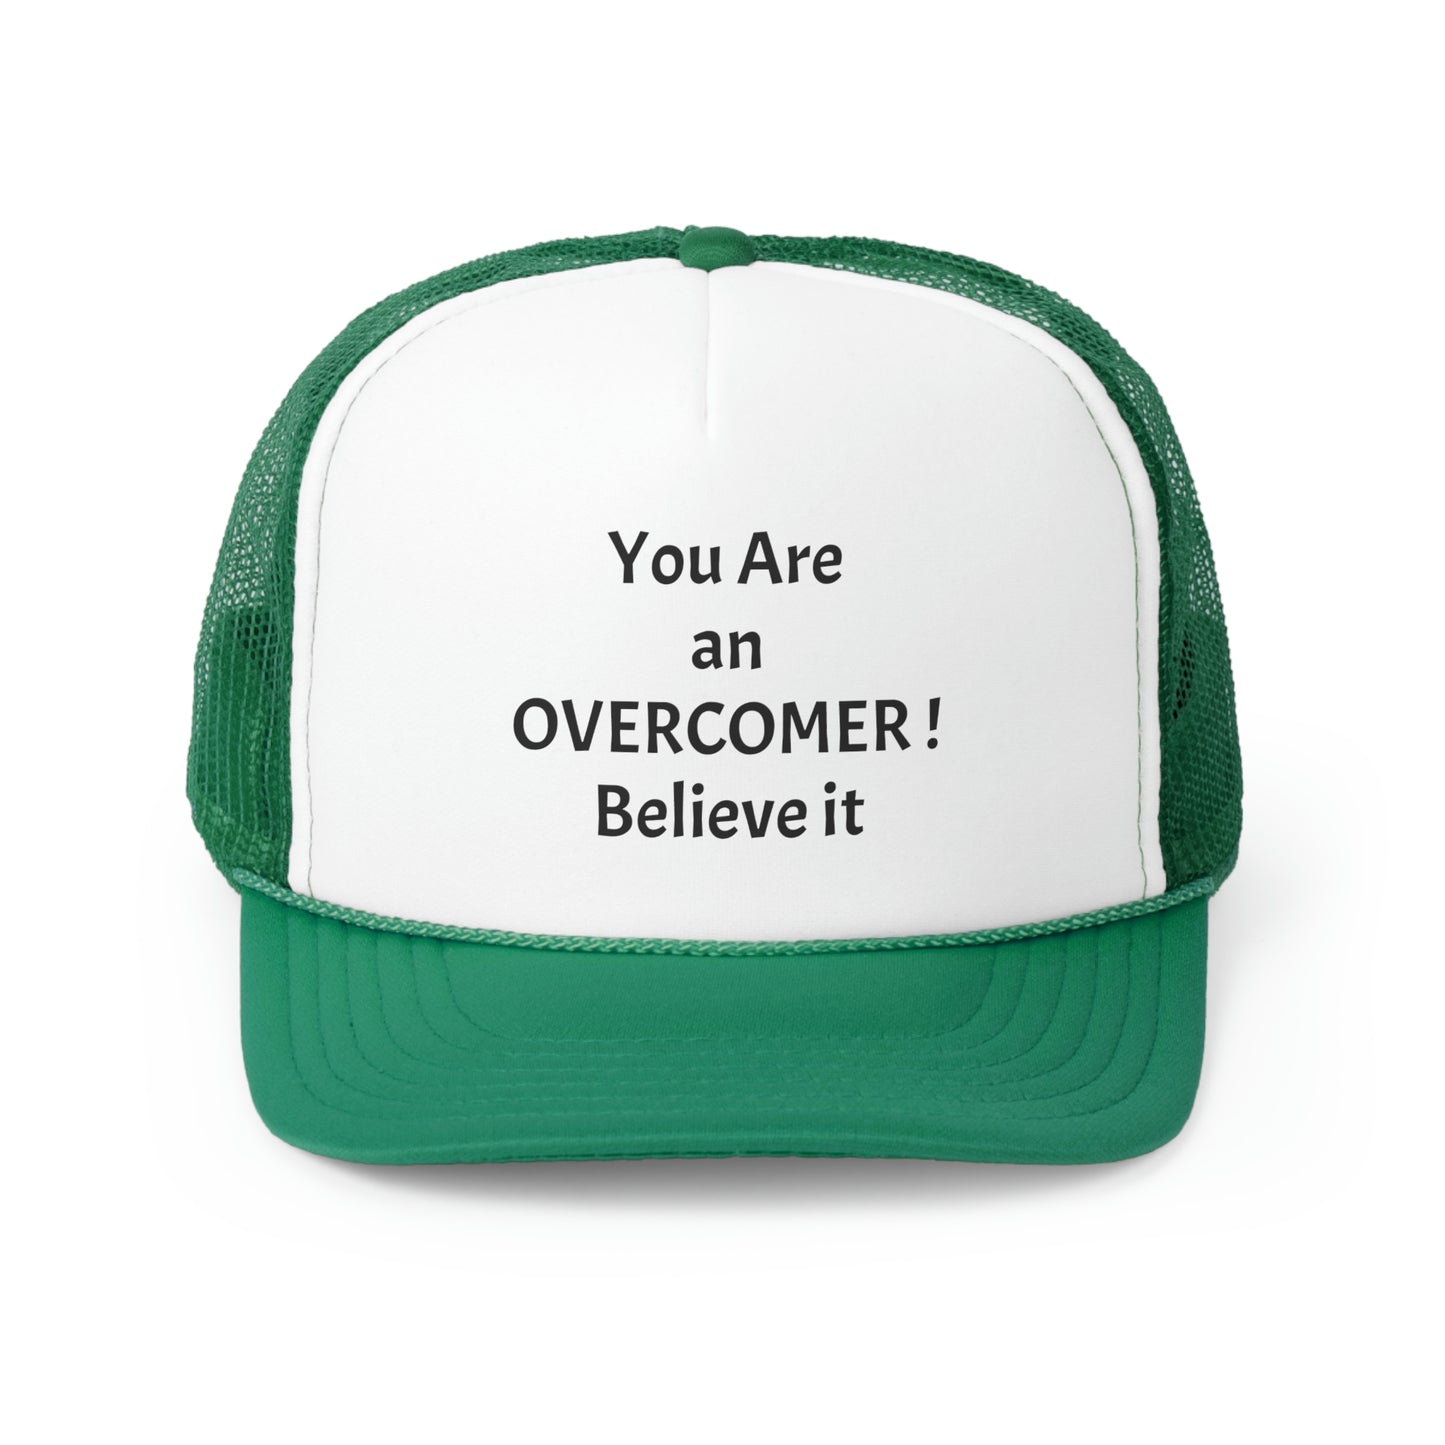 You Are an Overcomer! Trucker Caps